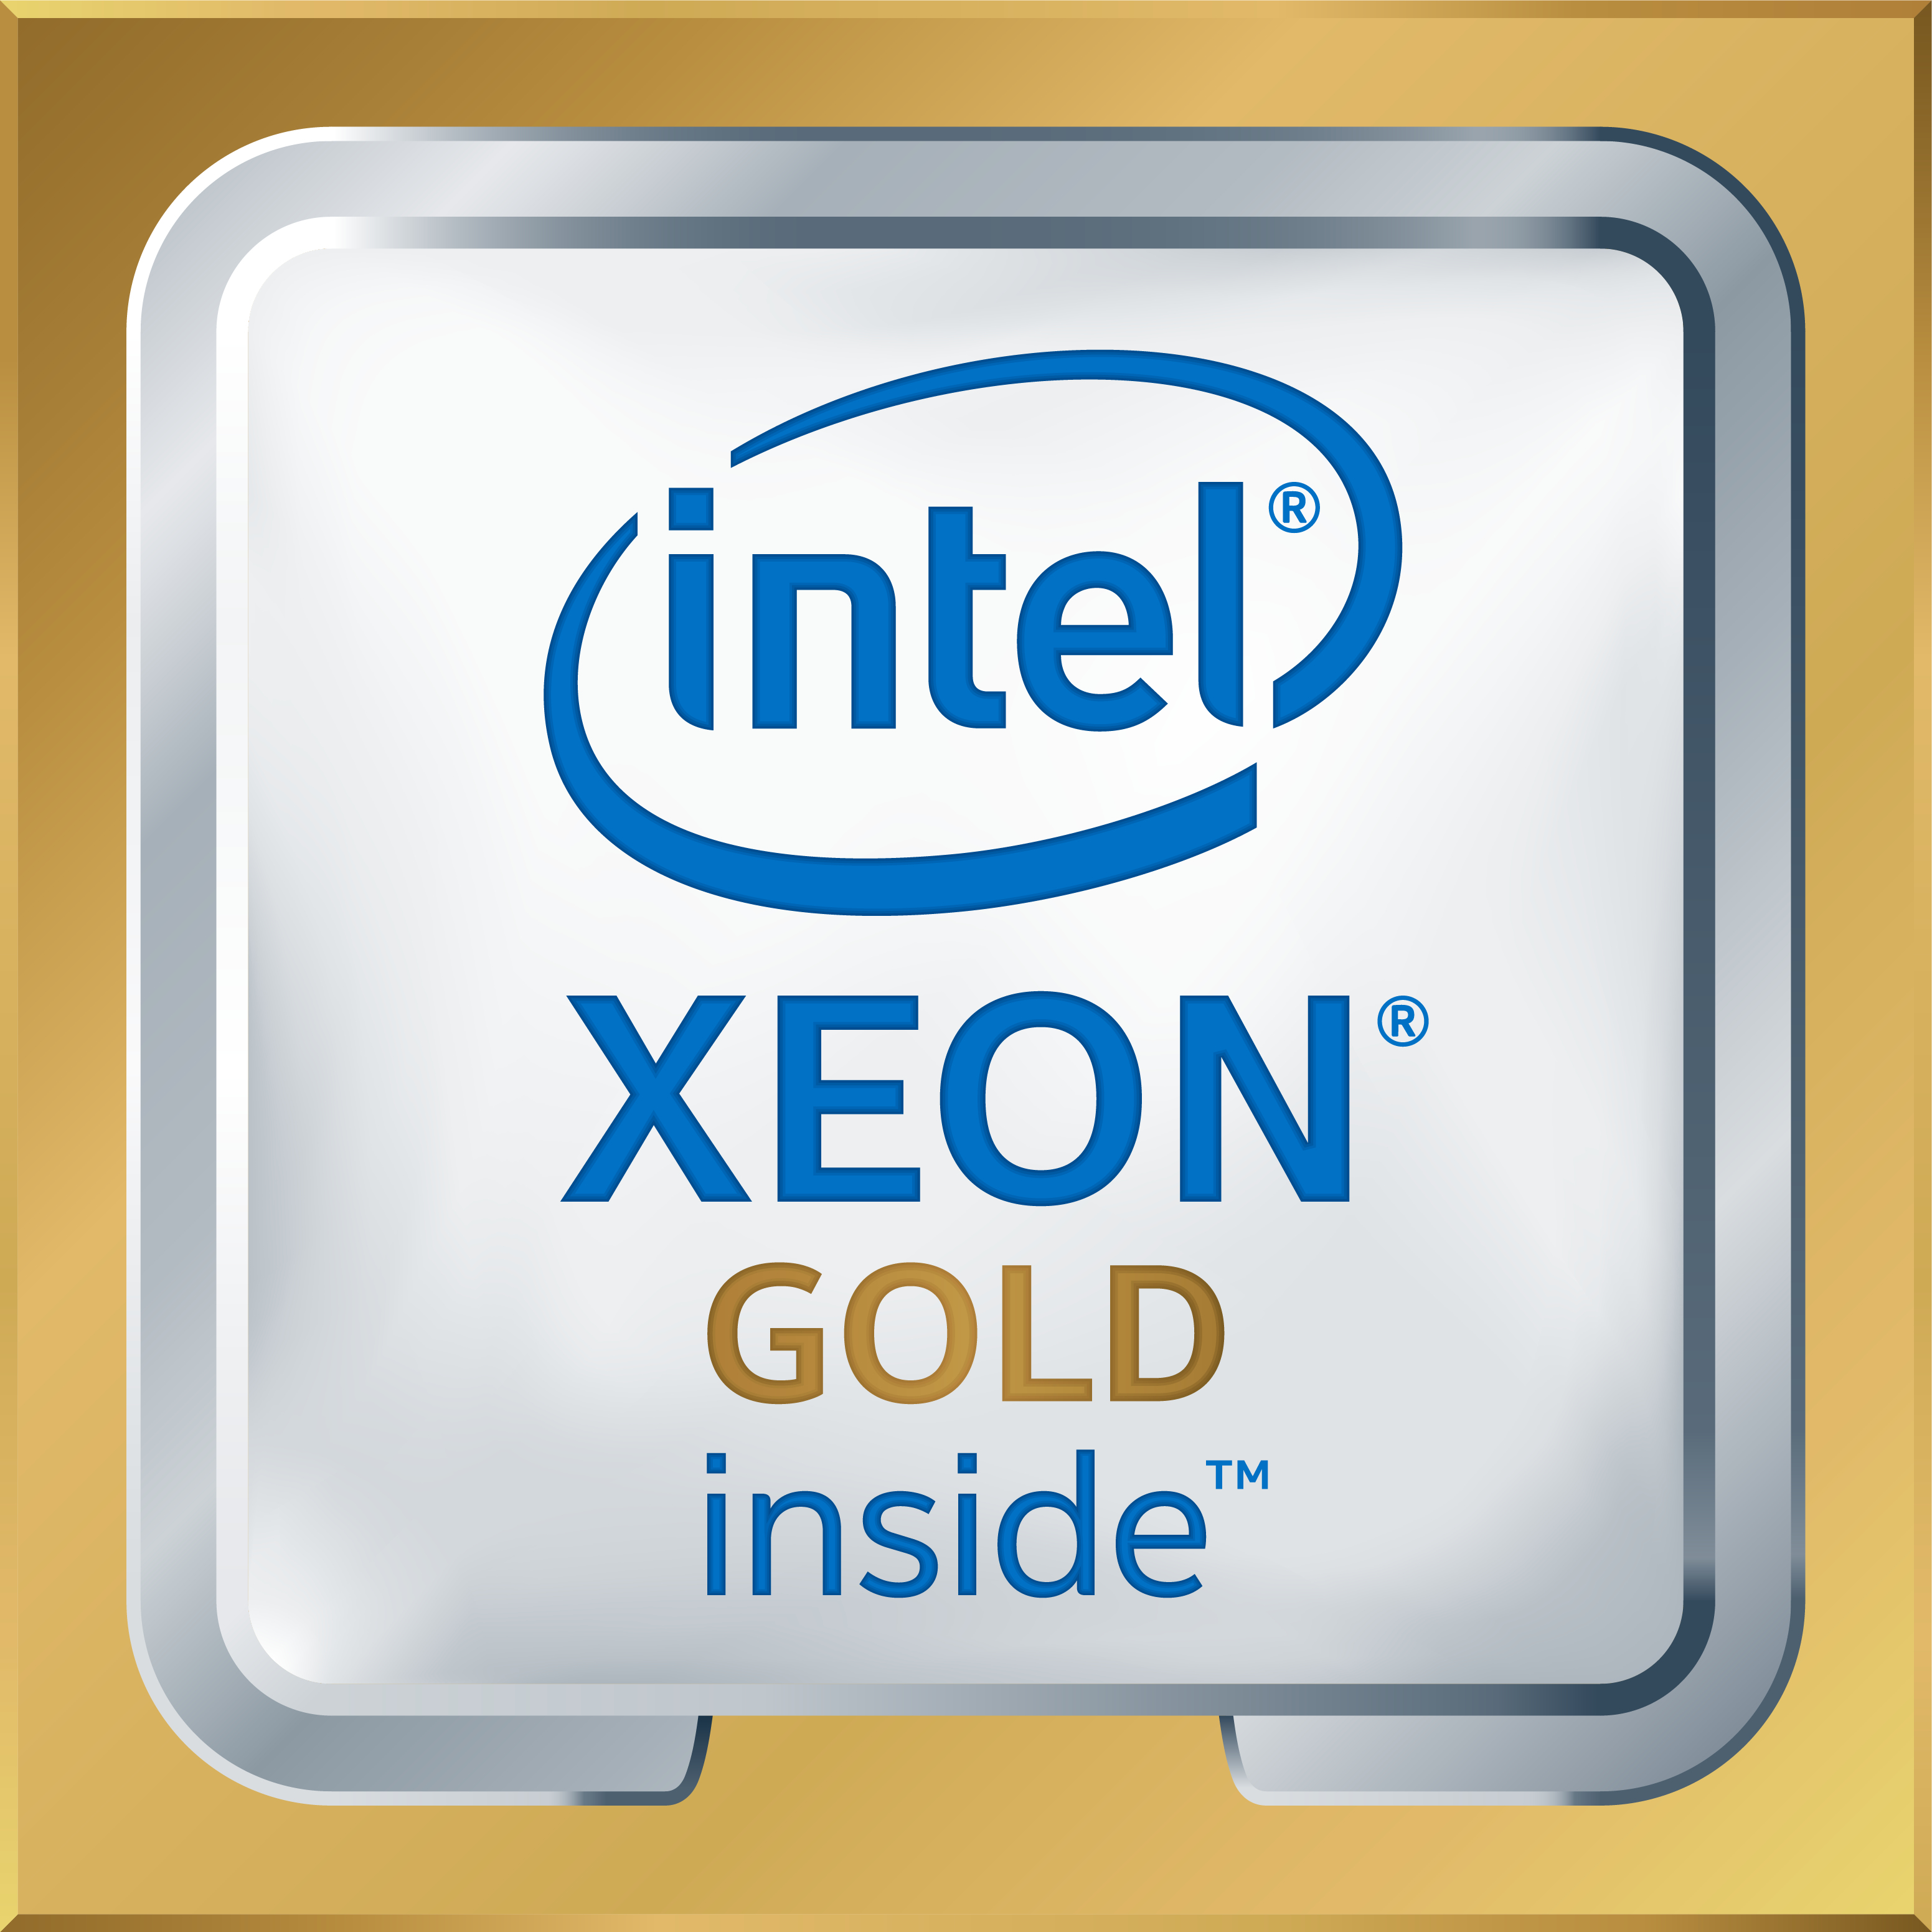 2 x Intel Xeon Gold 6134 - 3.2 GHz - 8-core - 24.75 MB cache - for ThinkSystem SN850